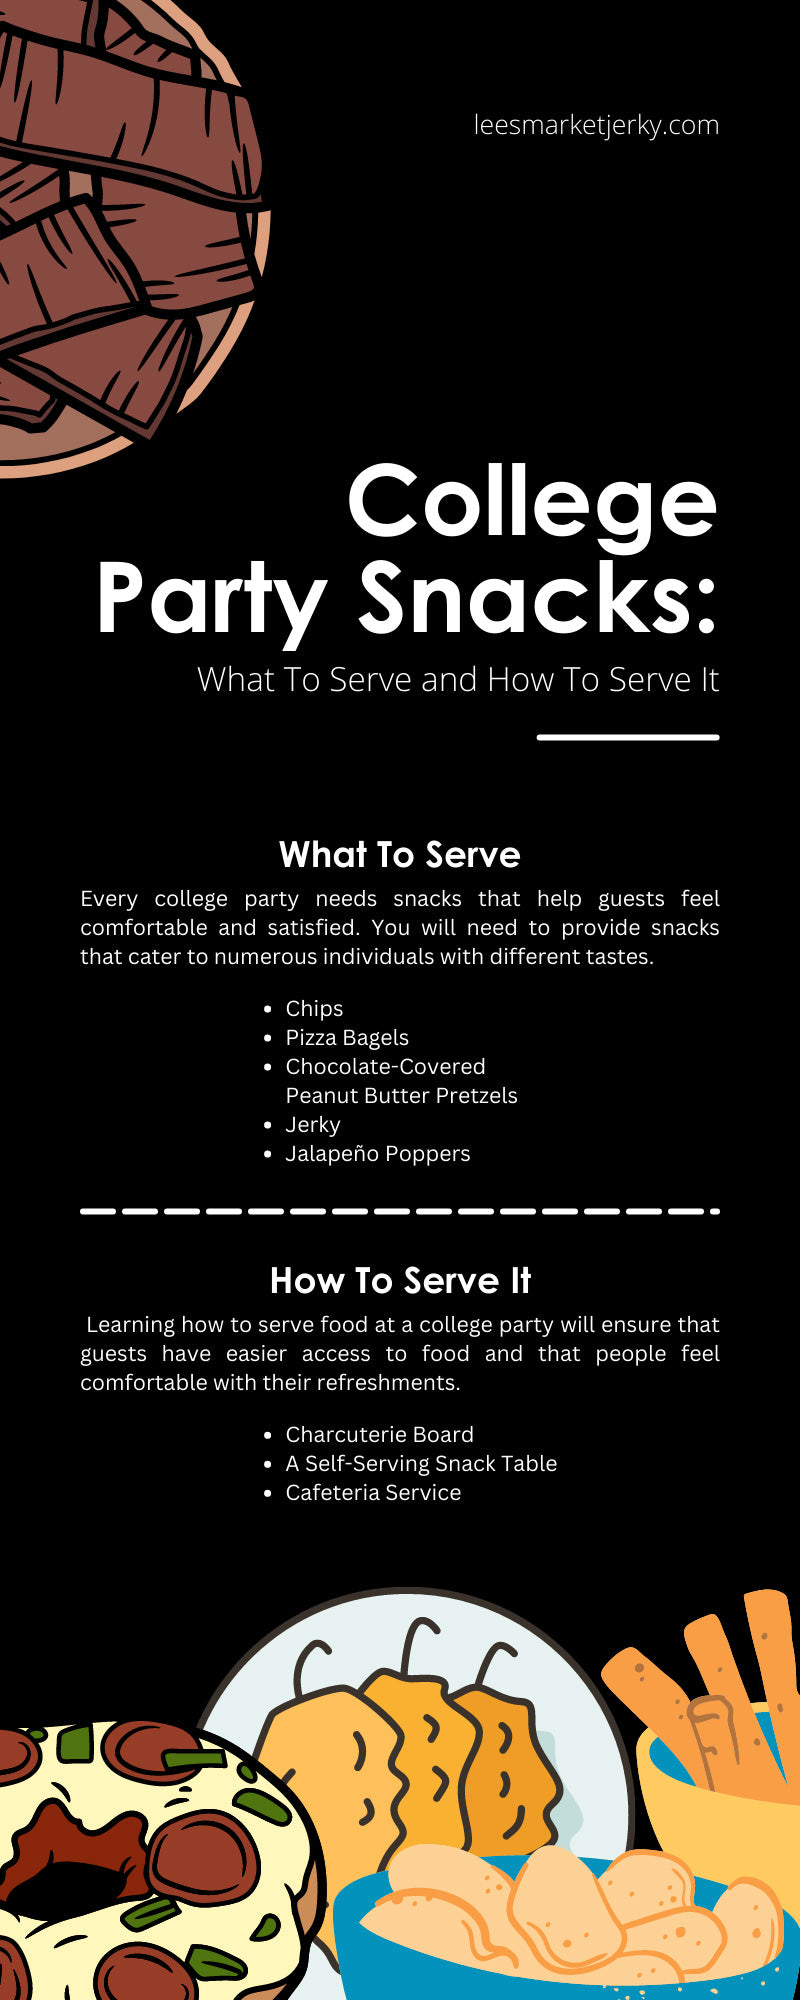 College Party Snacks: What To Serve and How To Serve It